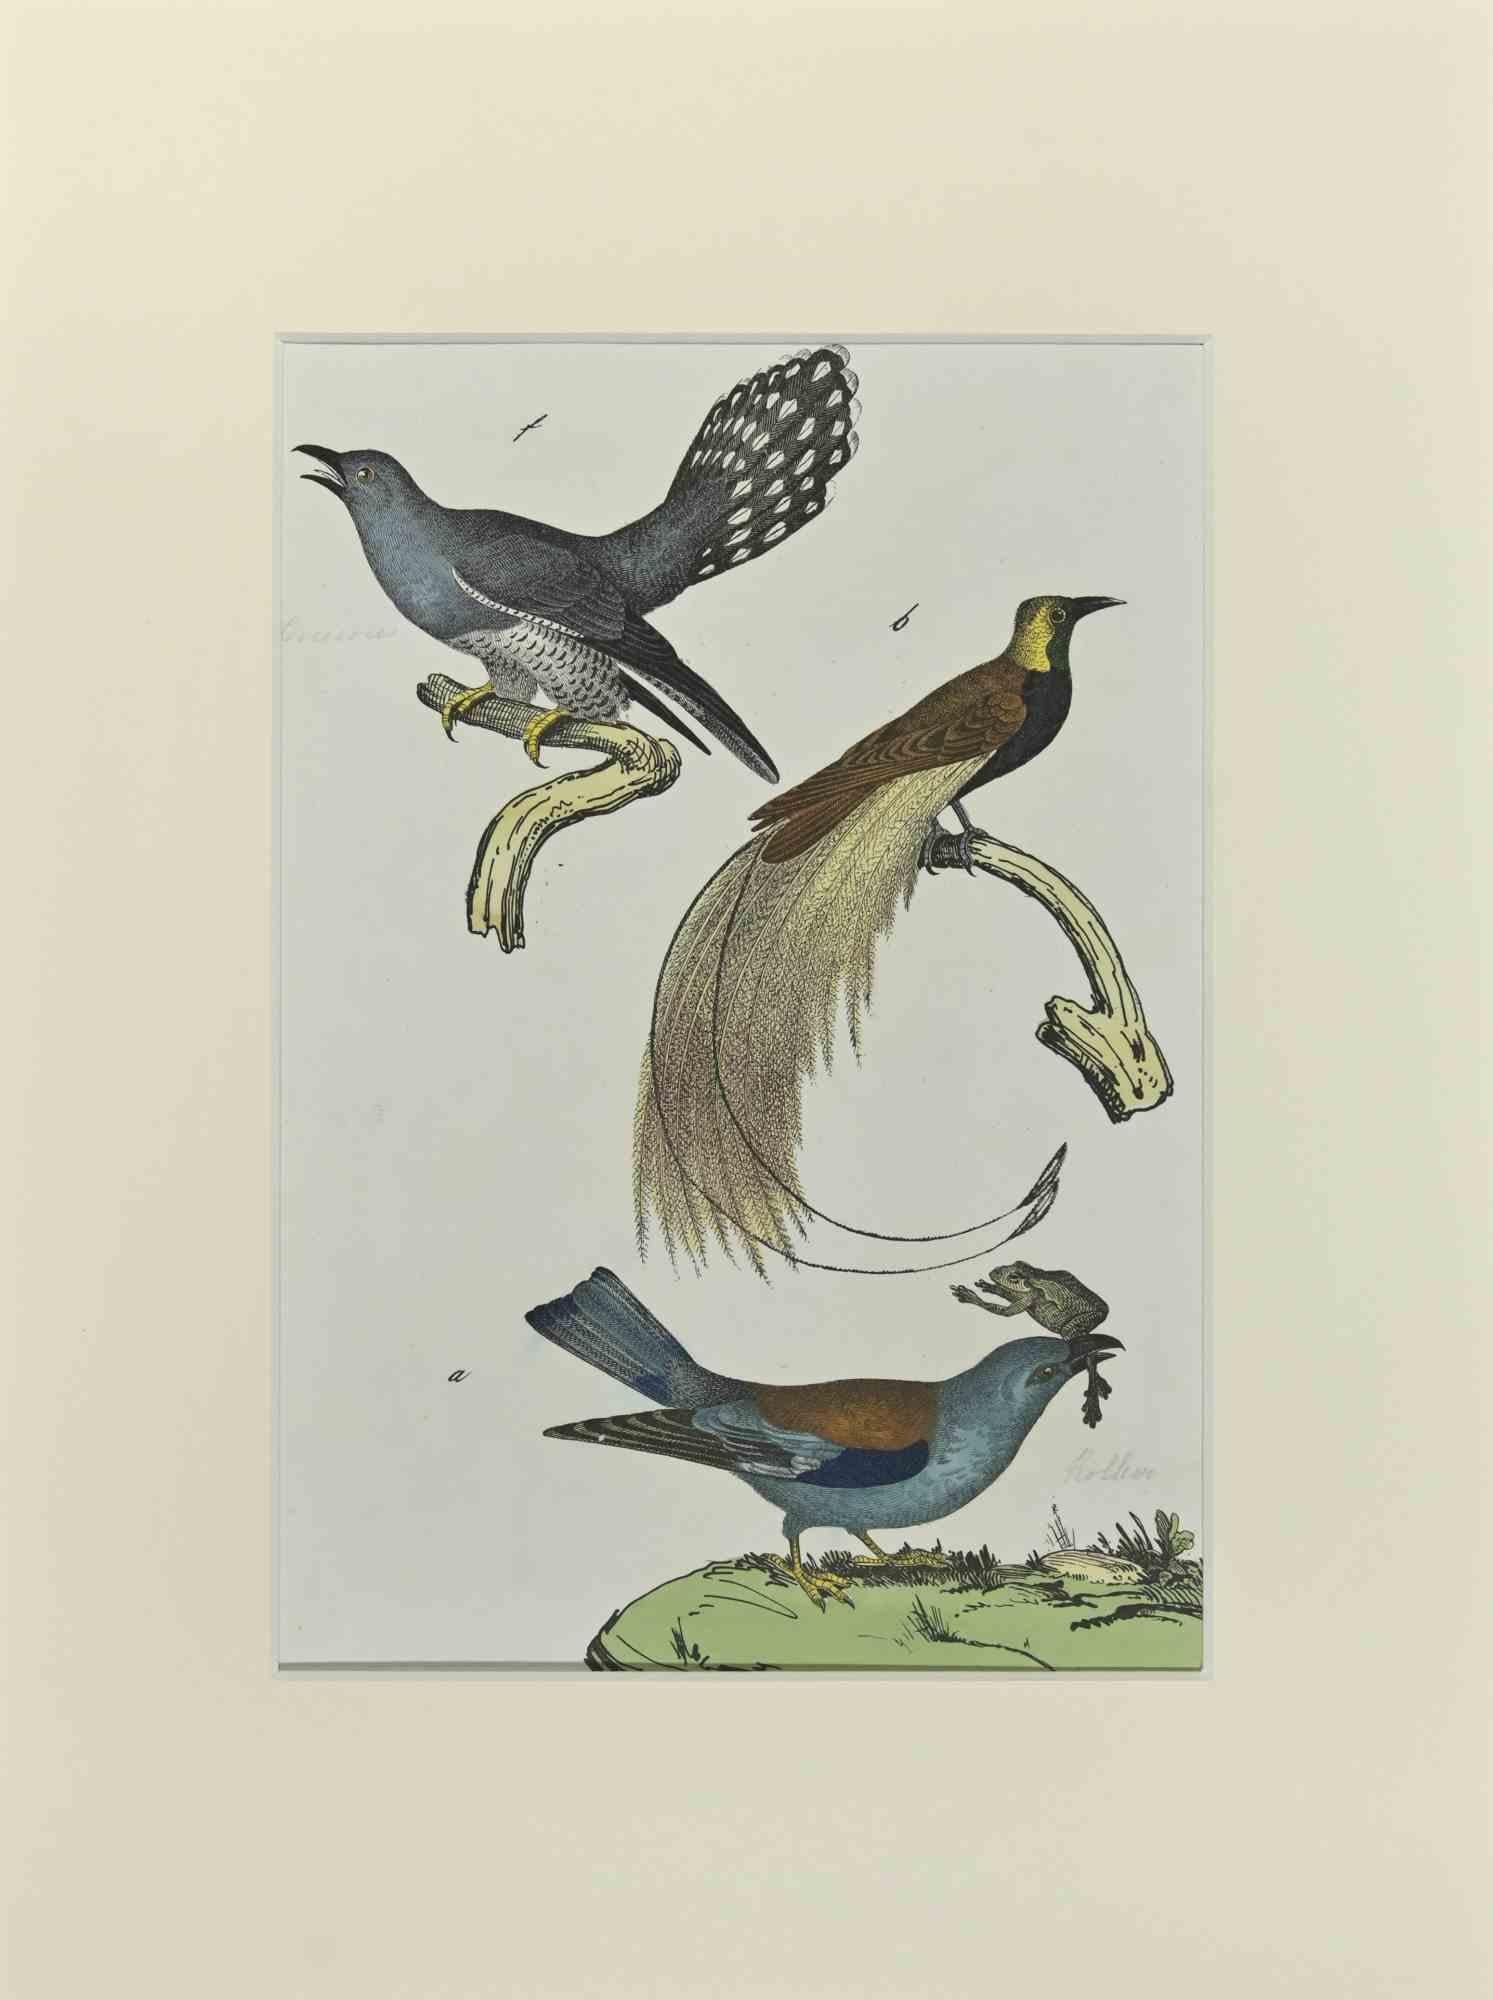 Birds with Particular Tail is an Etching hand colored realized by Gotthilf Heinrich von Schubert - Johann Friedrich Naumann, Illustration from Natural history of birds in pictures, published by Stuttgart and Esslingen, Schreiber and Schill 1840 ca.